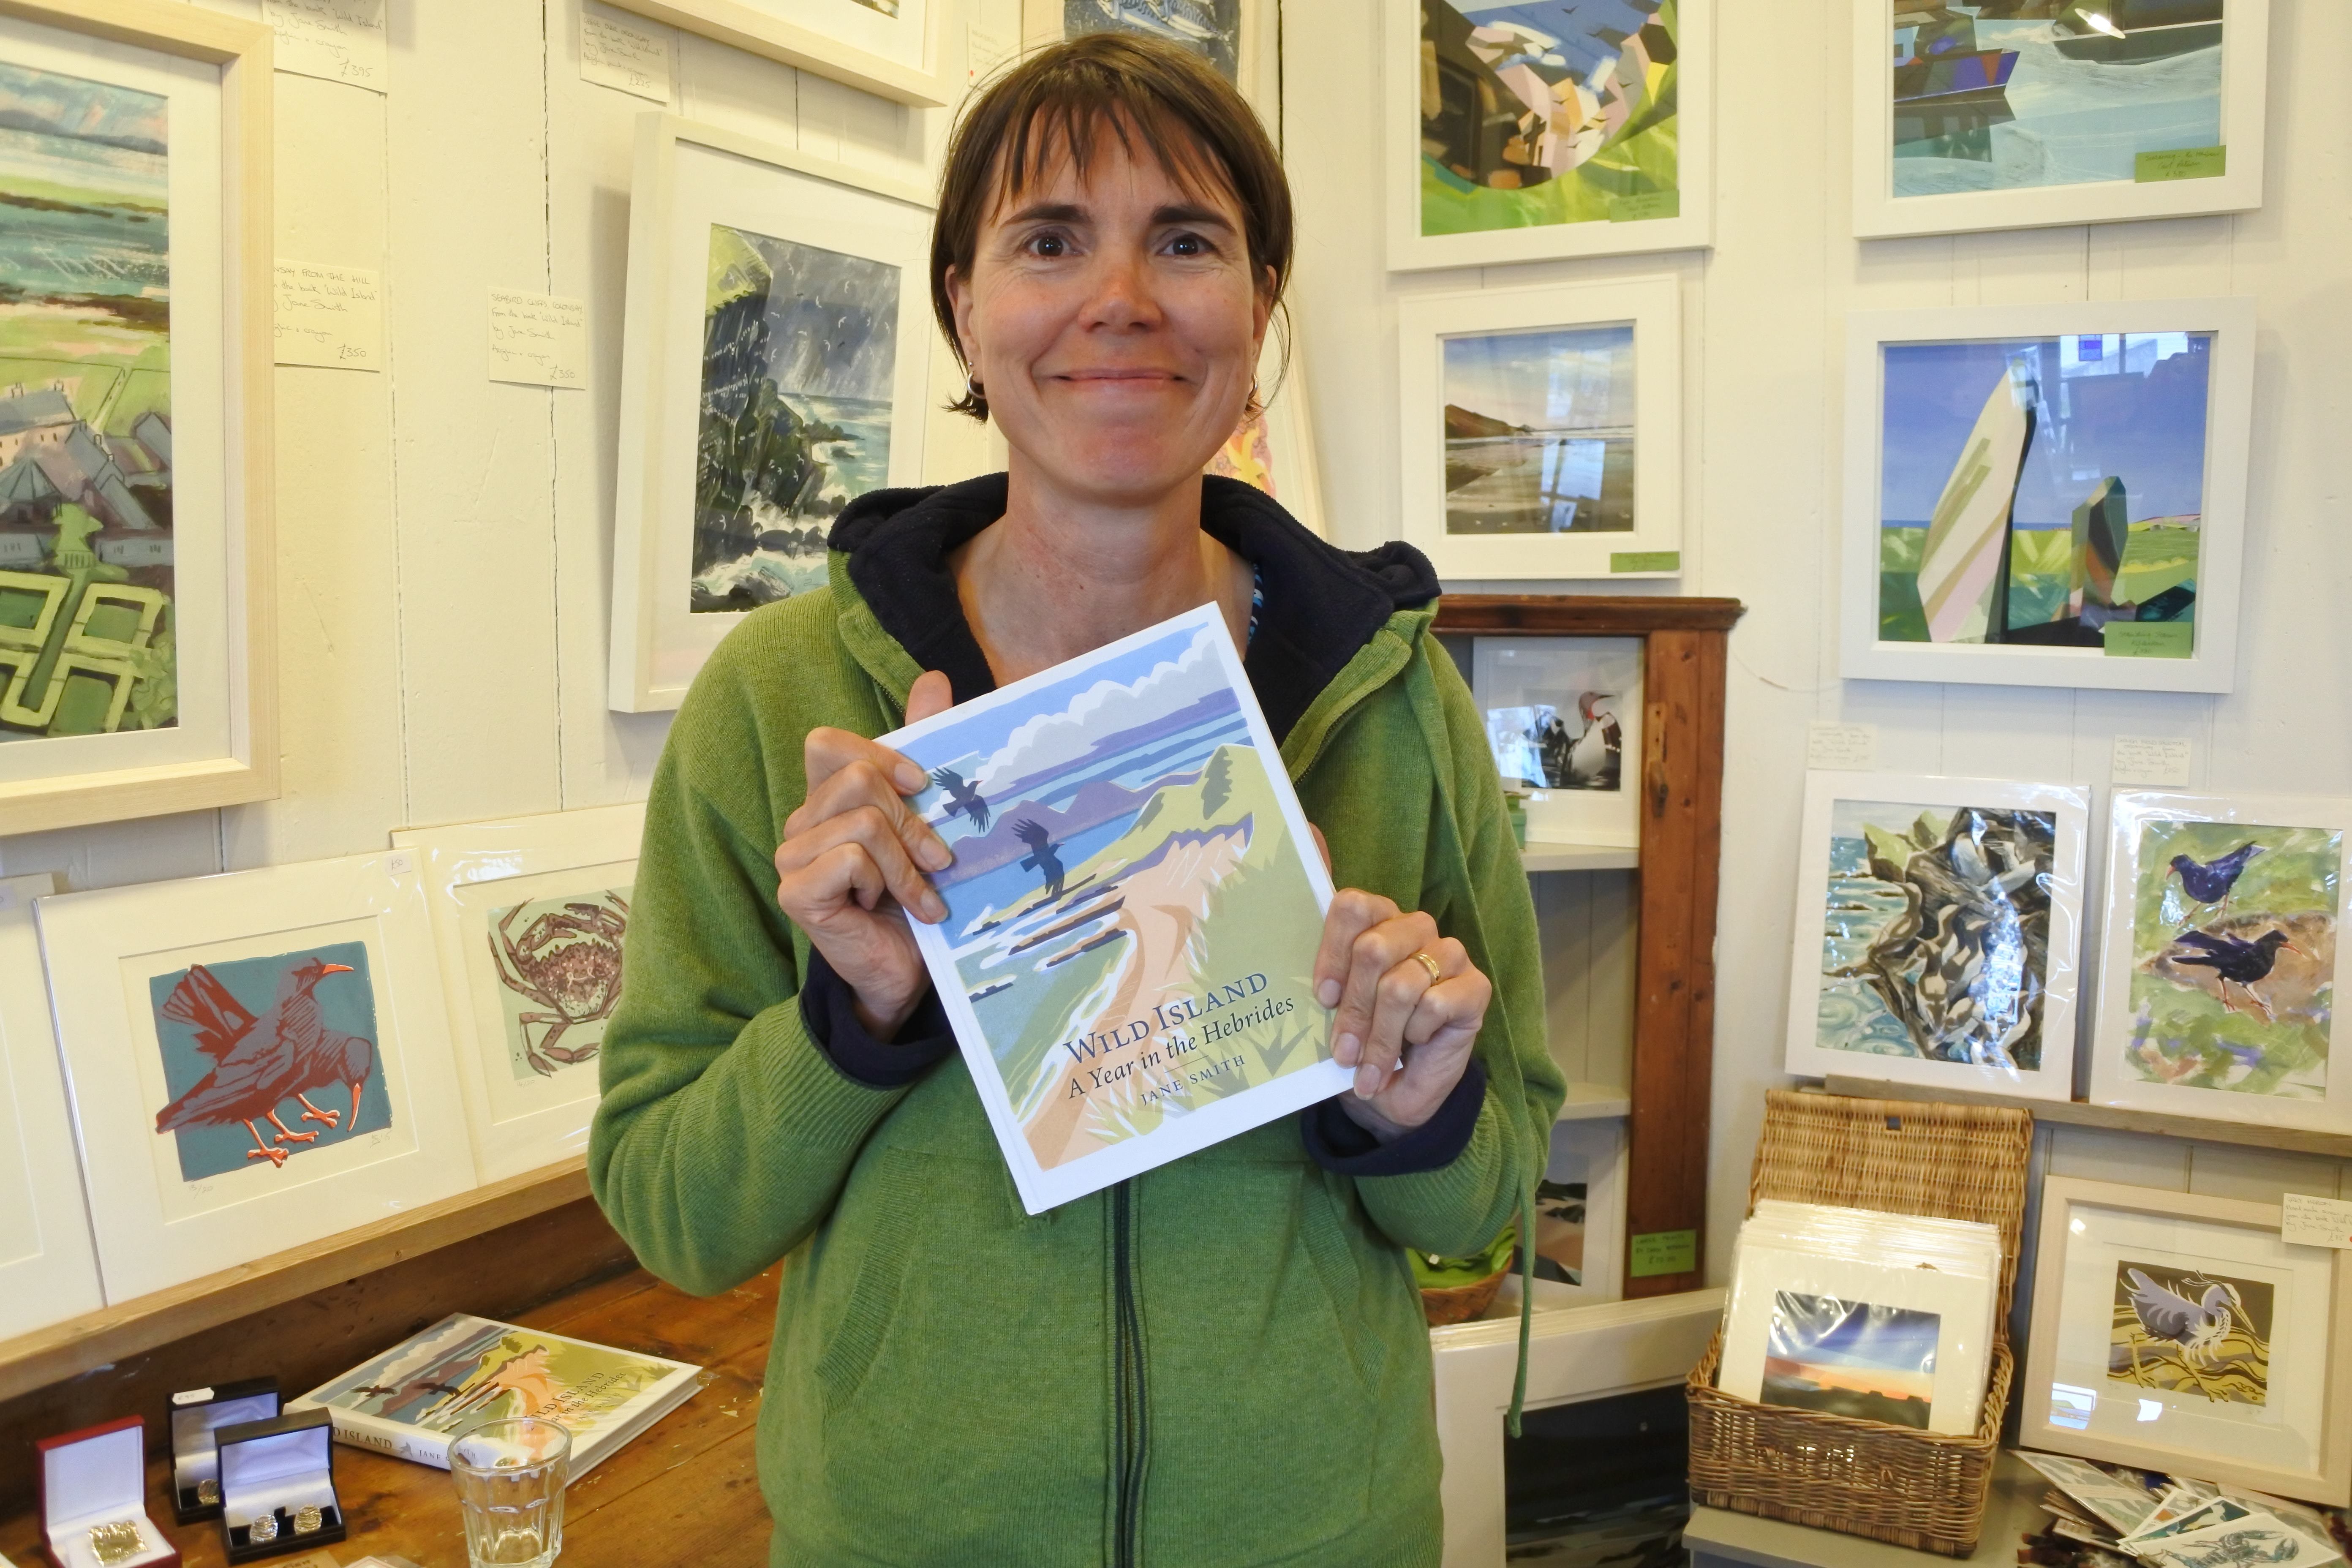 Jane Smith with book - Corncrake Community Newsletters